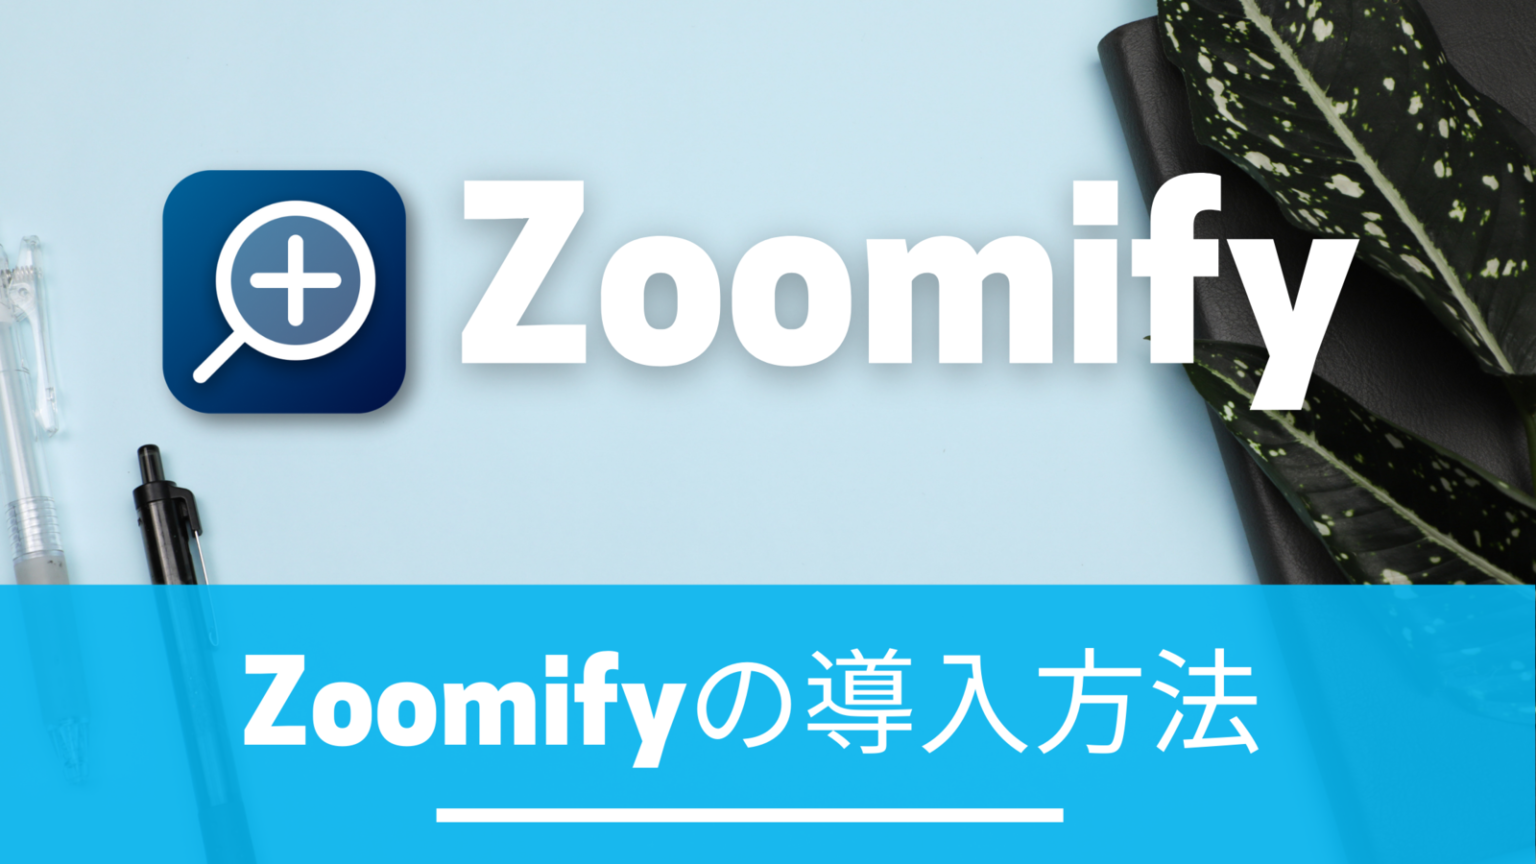 zoomify html5 pro